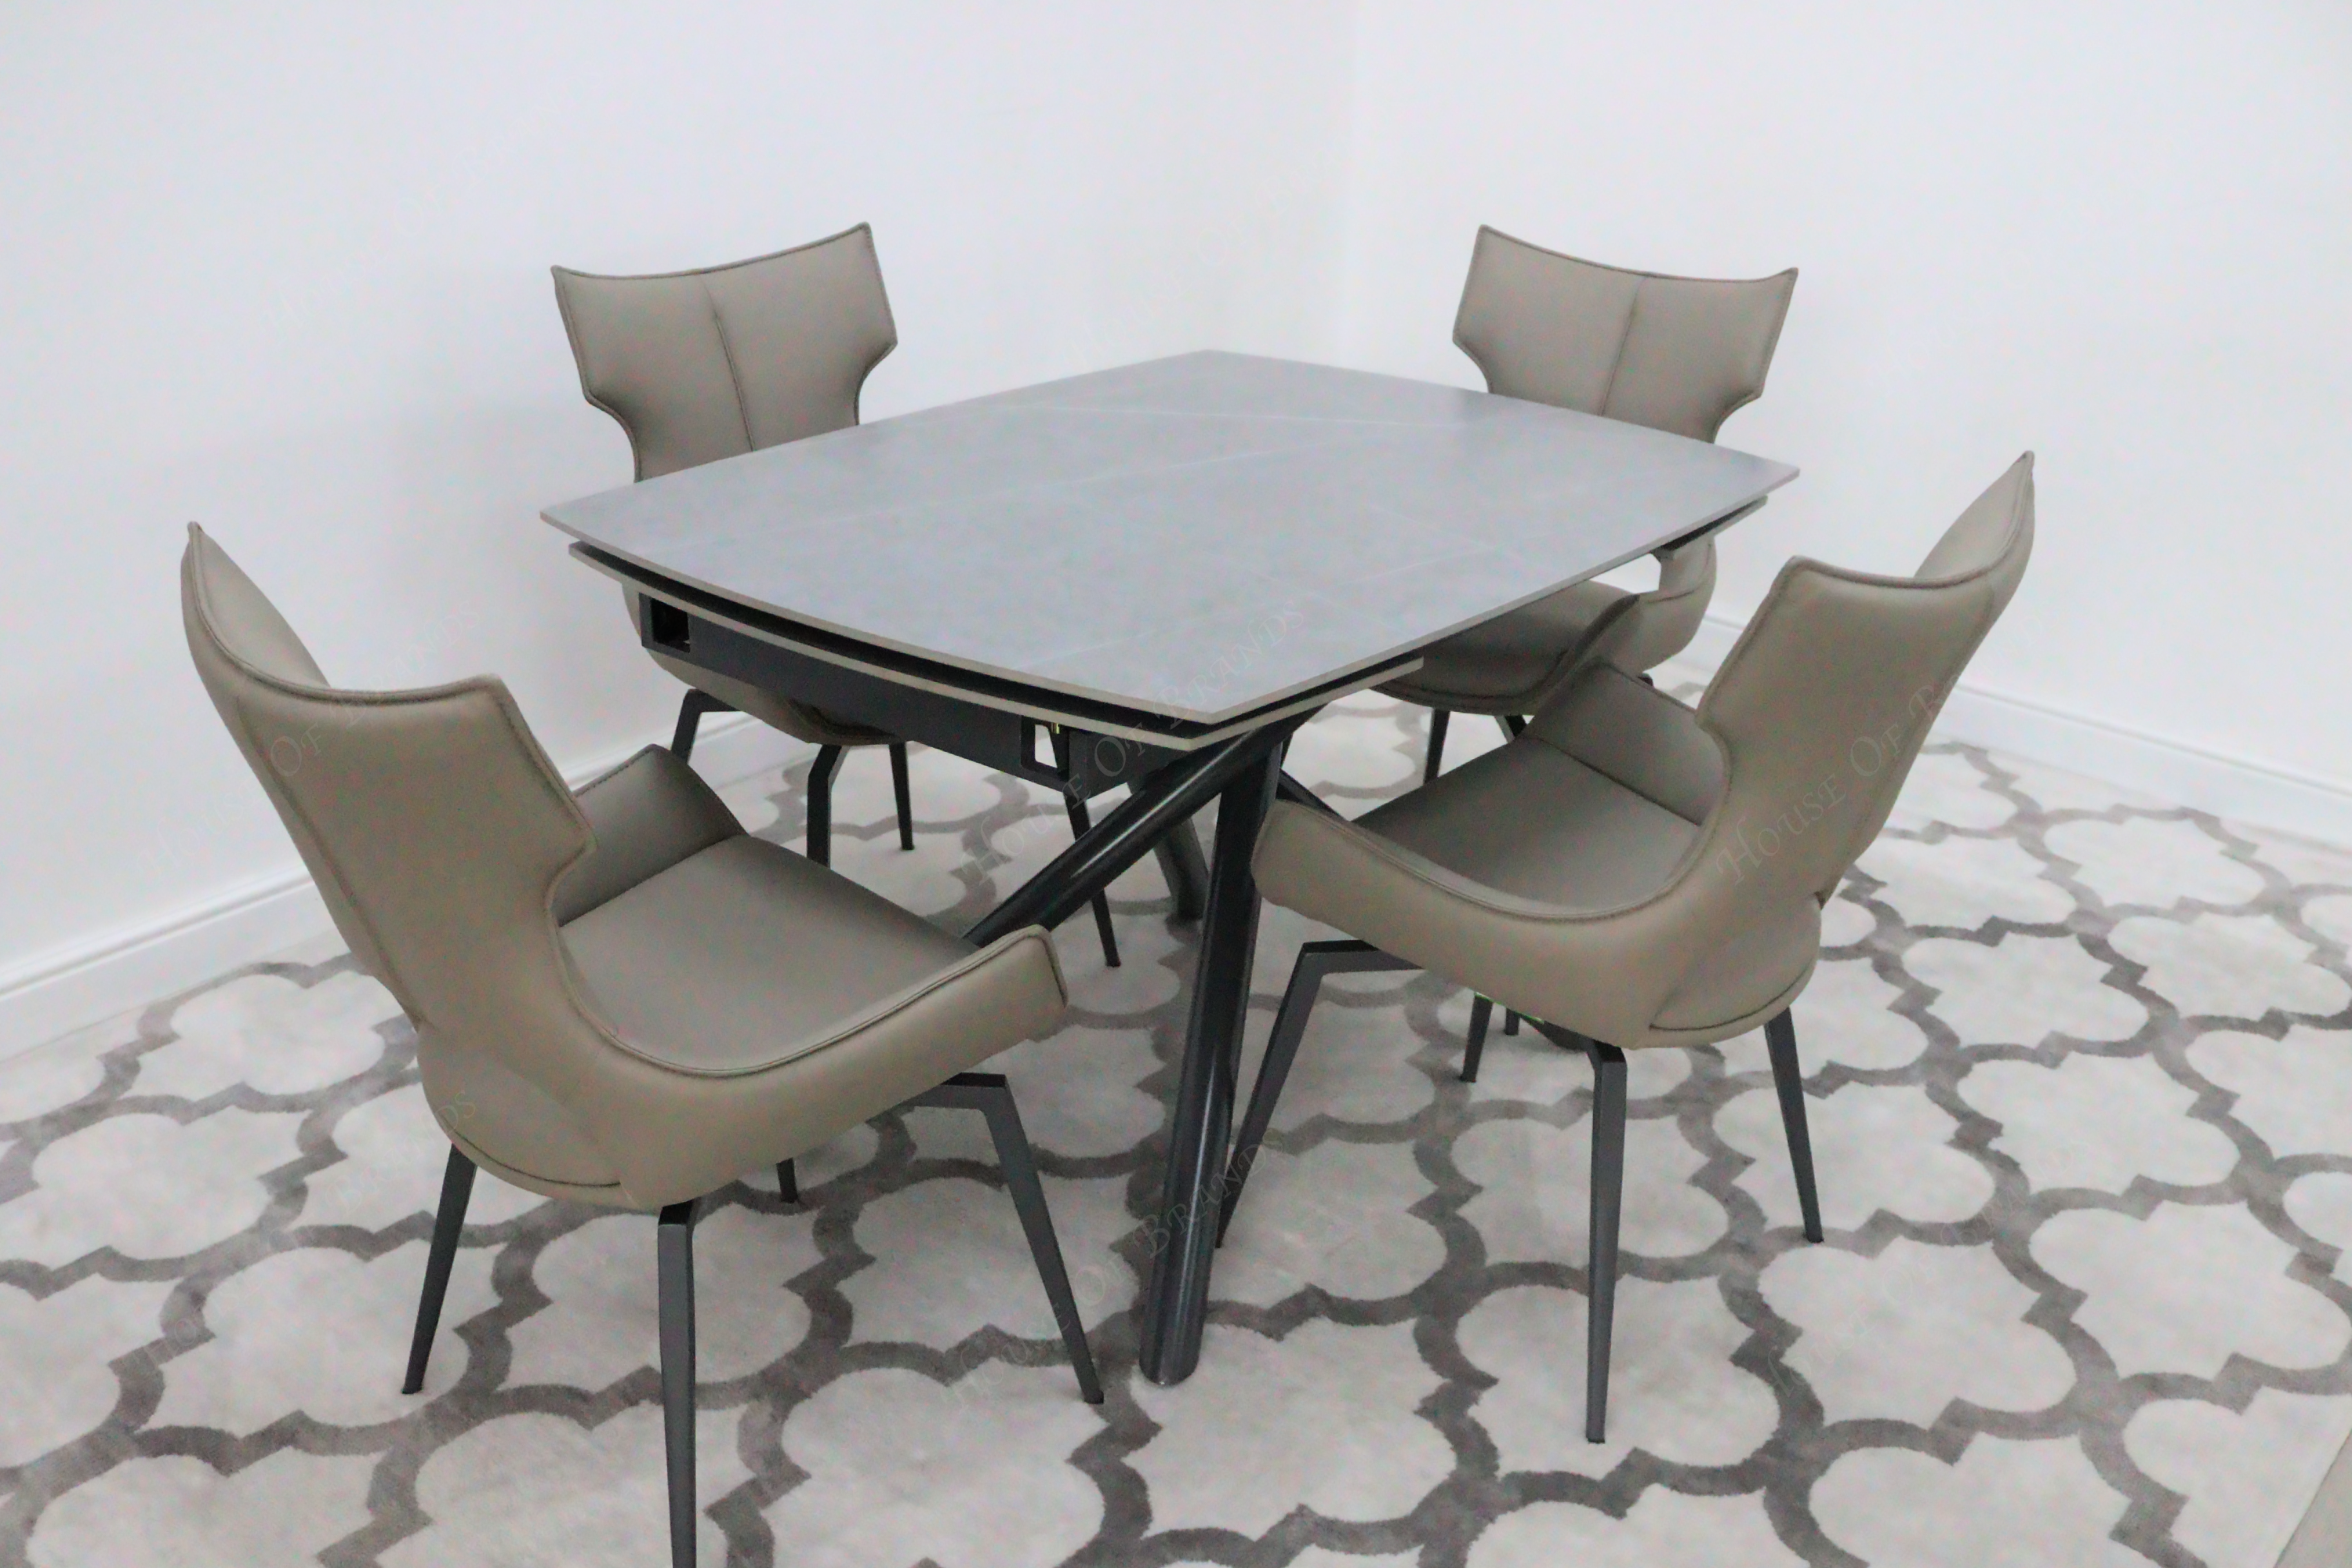 Giovanni 120-180cm Extendable Ceramic Dining Table with Taupe Rafaello Dining Chair